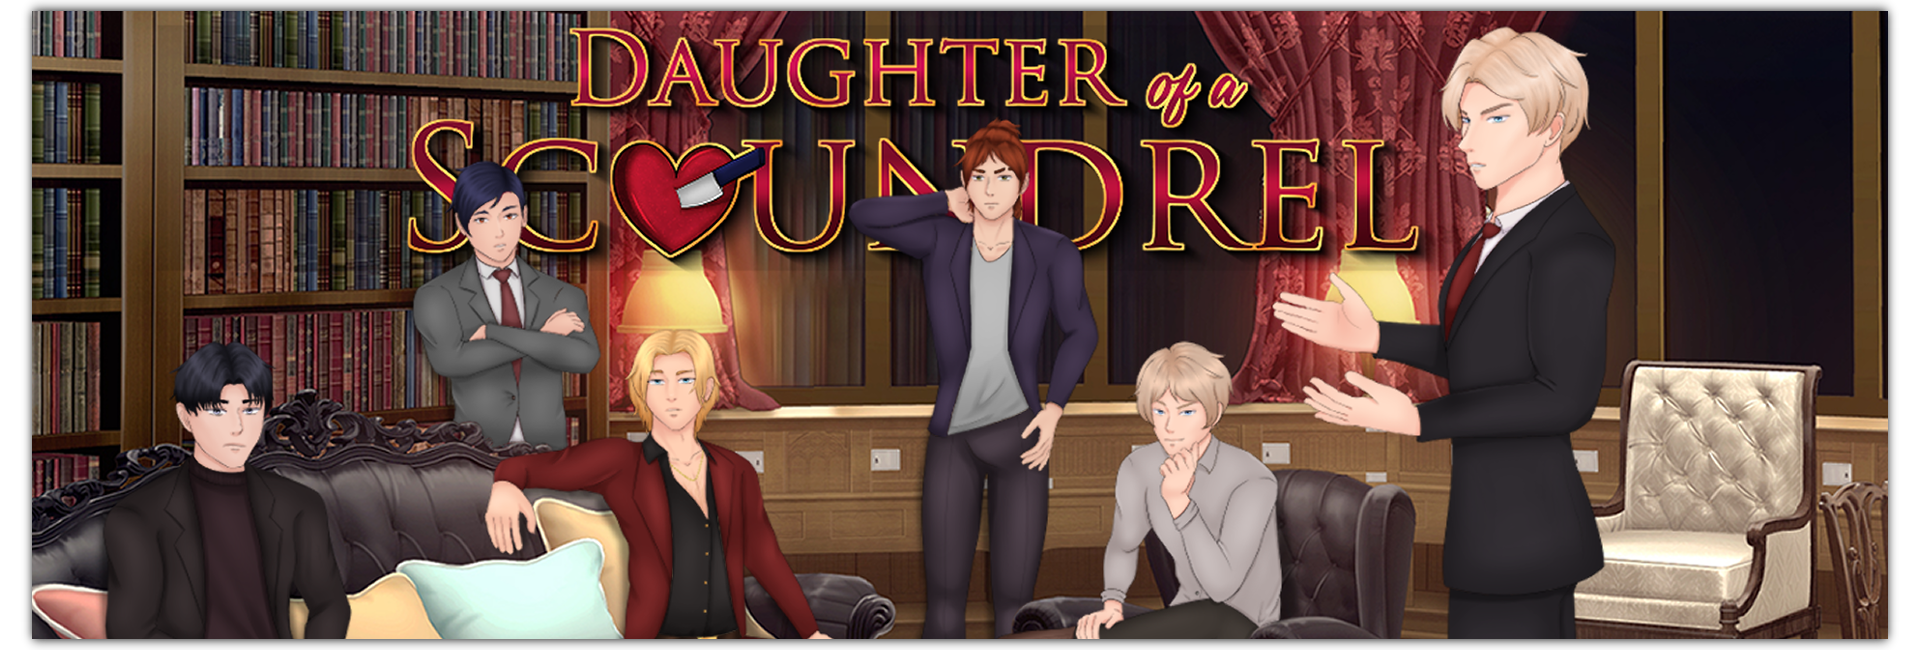 Daughter of a Scoundrel [Demo]